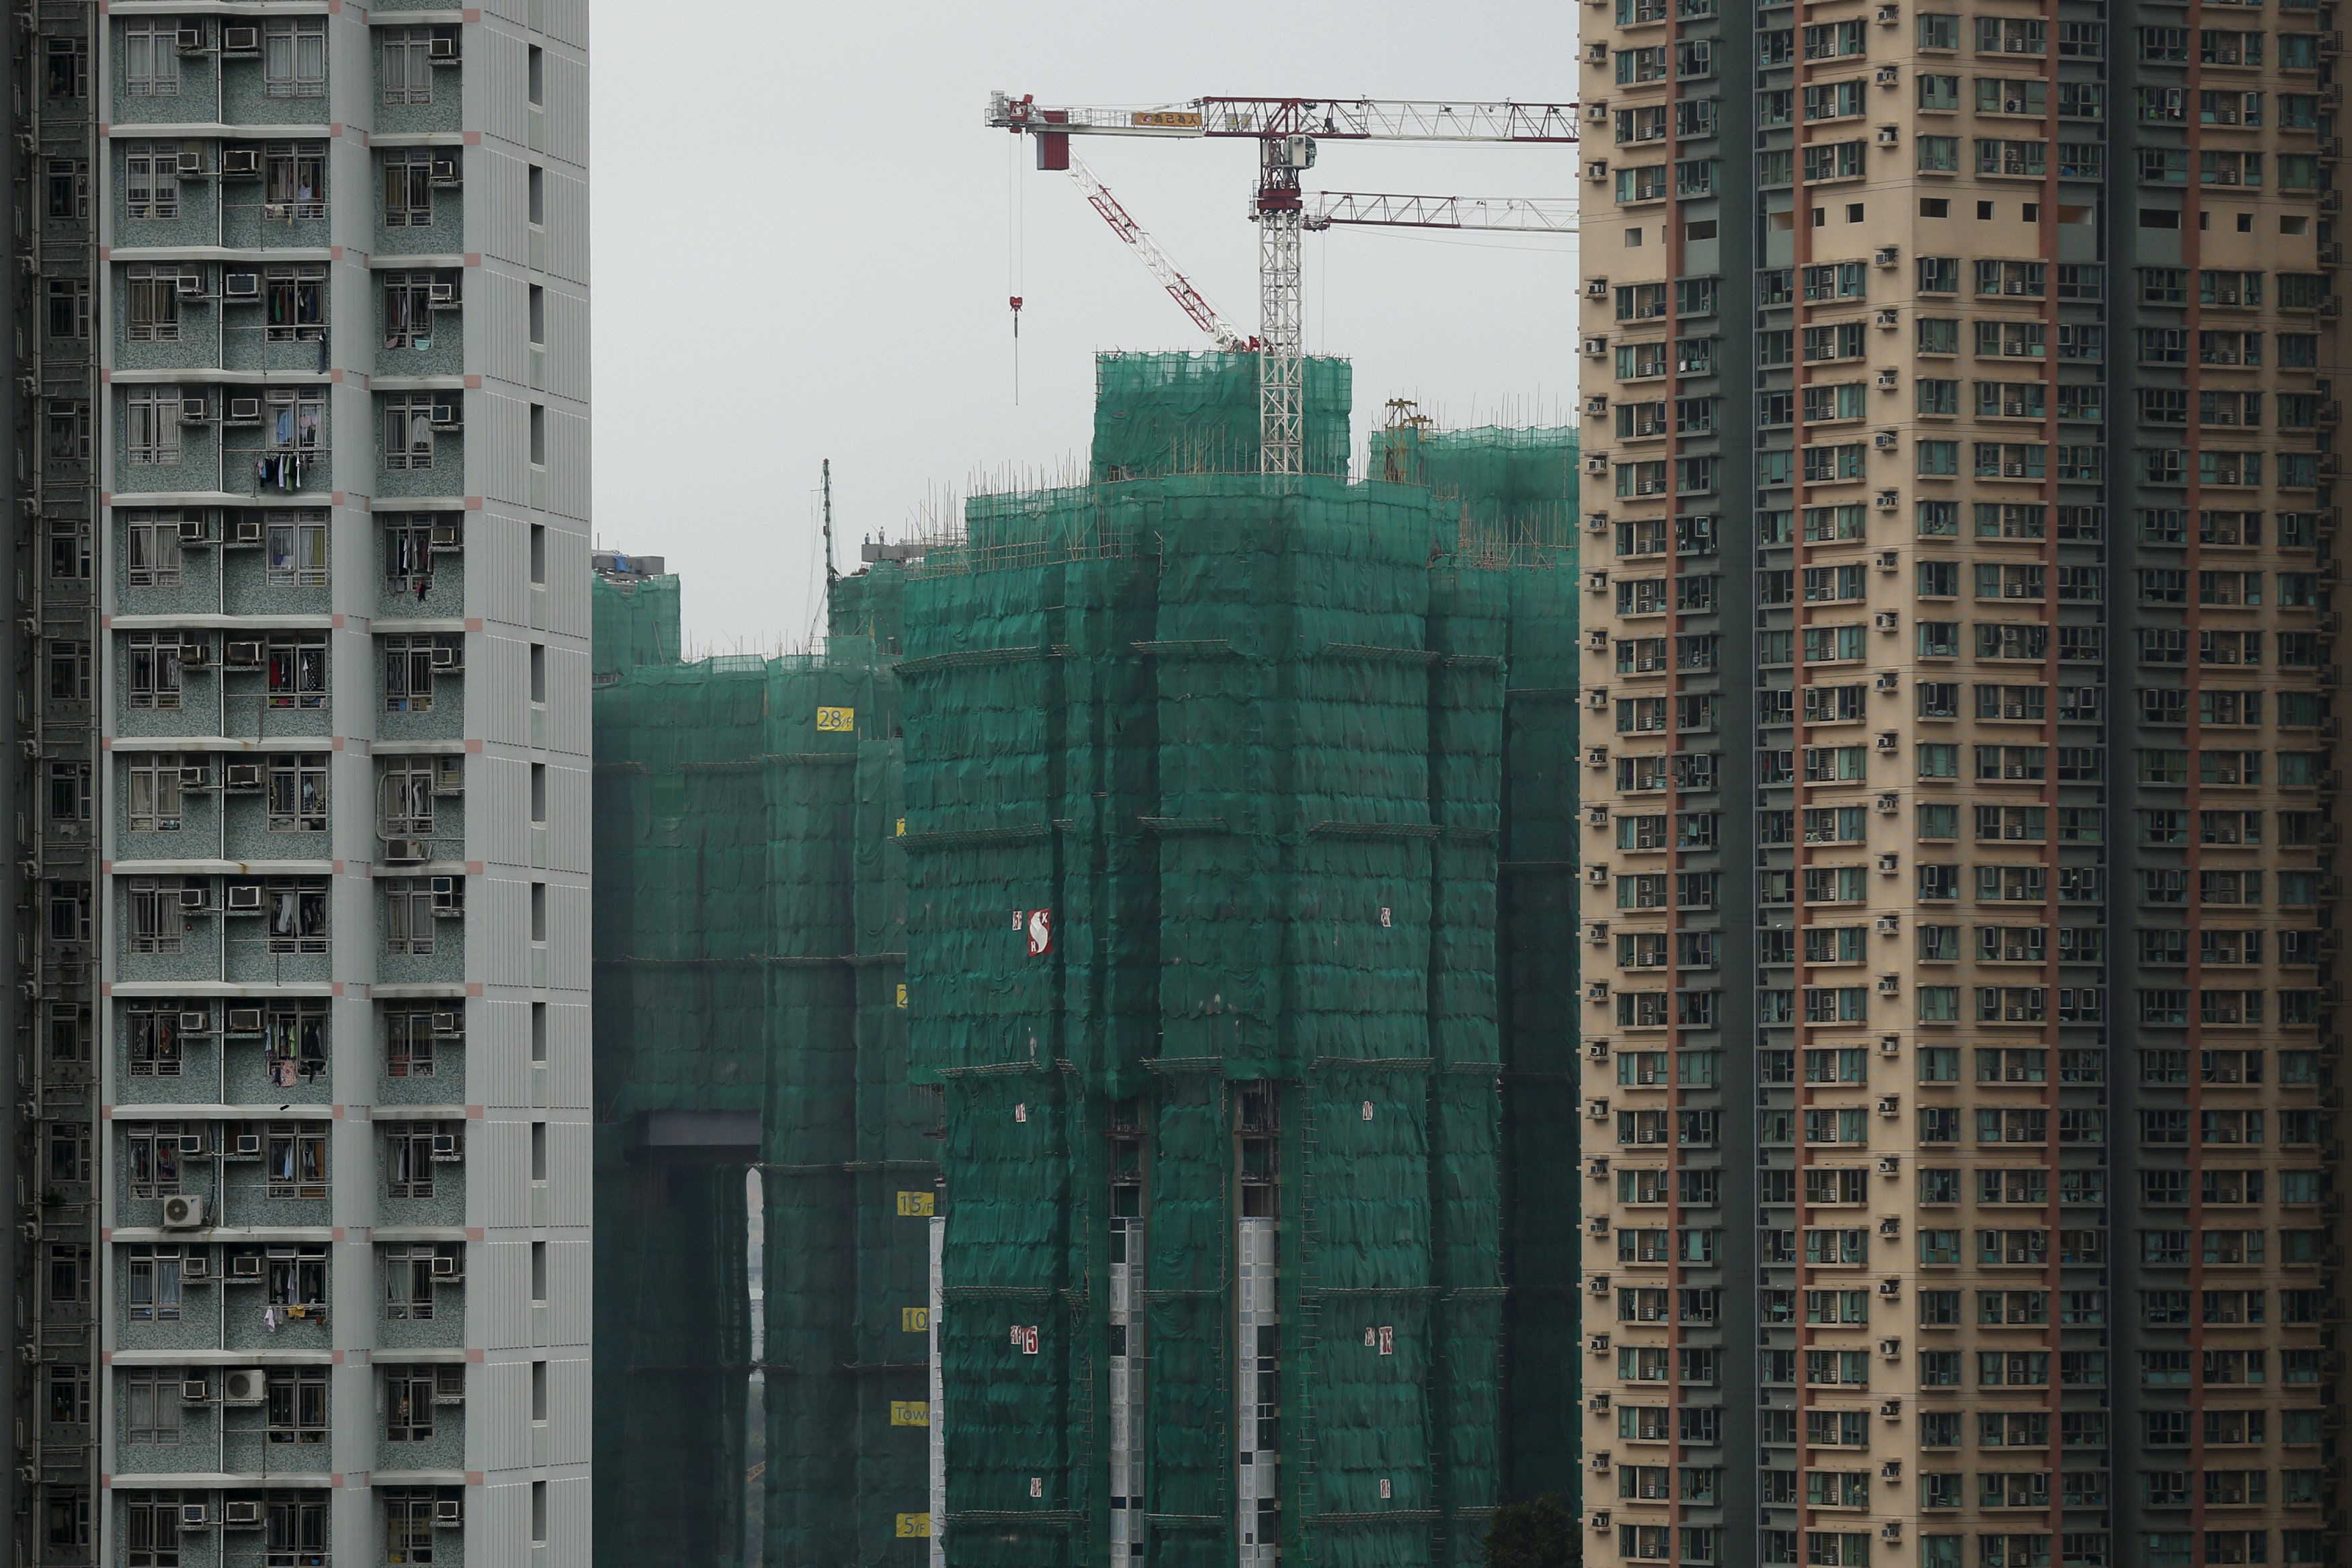 Construction cranes are seen at the building site of a new private housing complex in Hong Kong, China December 15, 2015. Hong Kong is bracing for greater economic challenges as the prospect of a new cycle of interest rate rises drives fears of capital outflows that could put further pressure on the Asian financial hub. Hong Kong's property market, which has seen prices more than double since 2008, had already slowed in anticipation of a local rate hike, and analysts say a further slowdown will depend on China, which is facing its weakest growth in 25 years. Picture taken December 15. REUTERS/Tyrone Siu